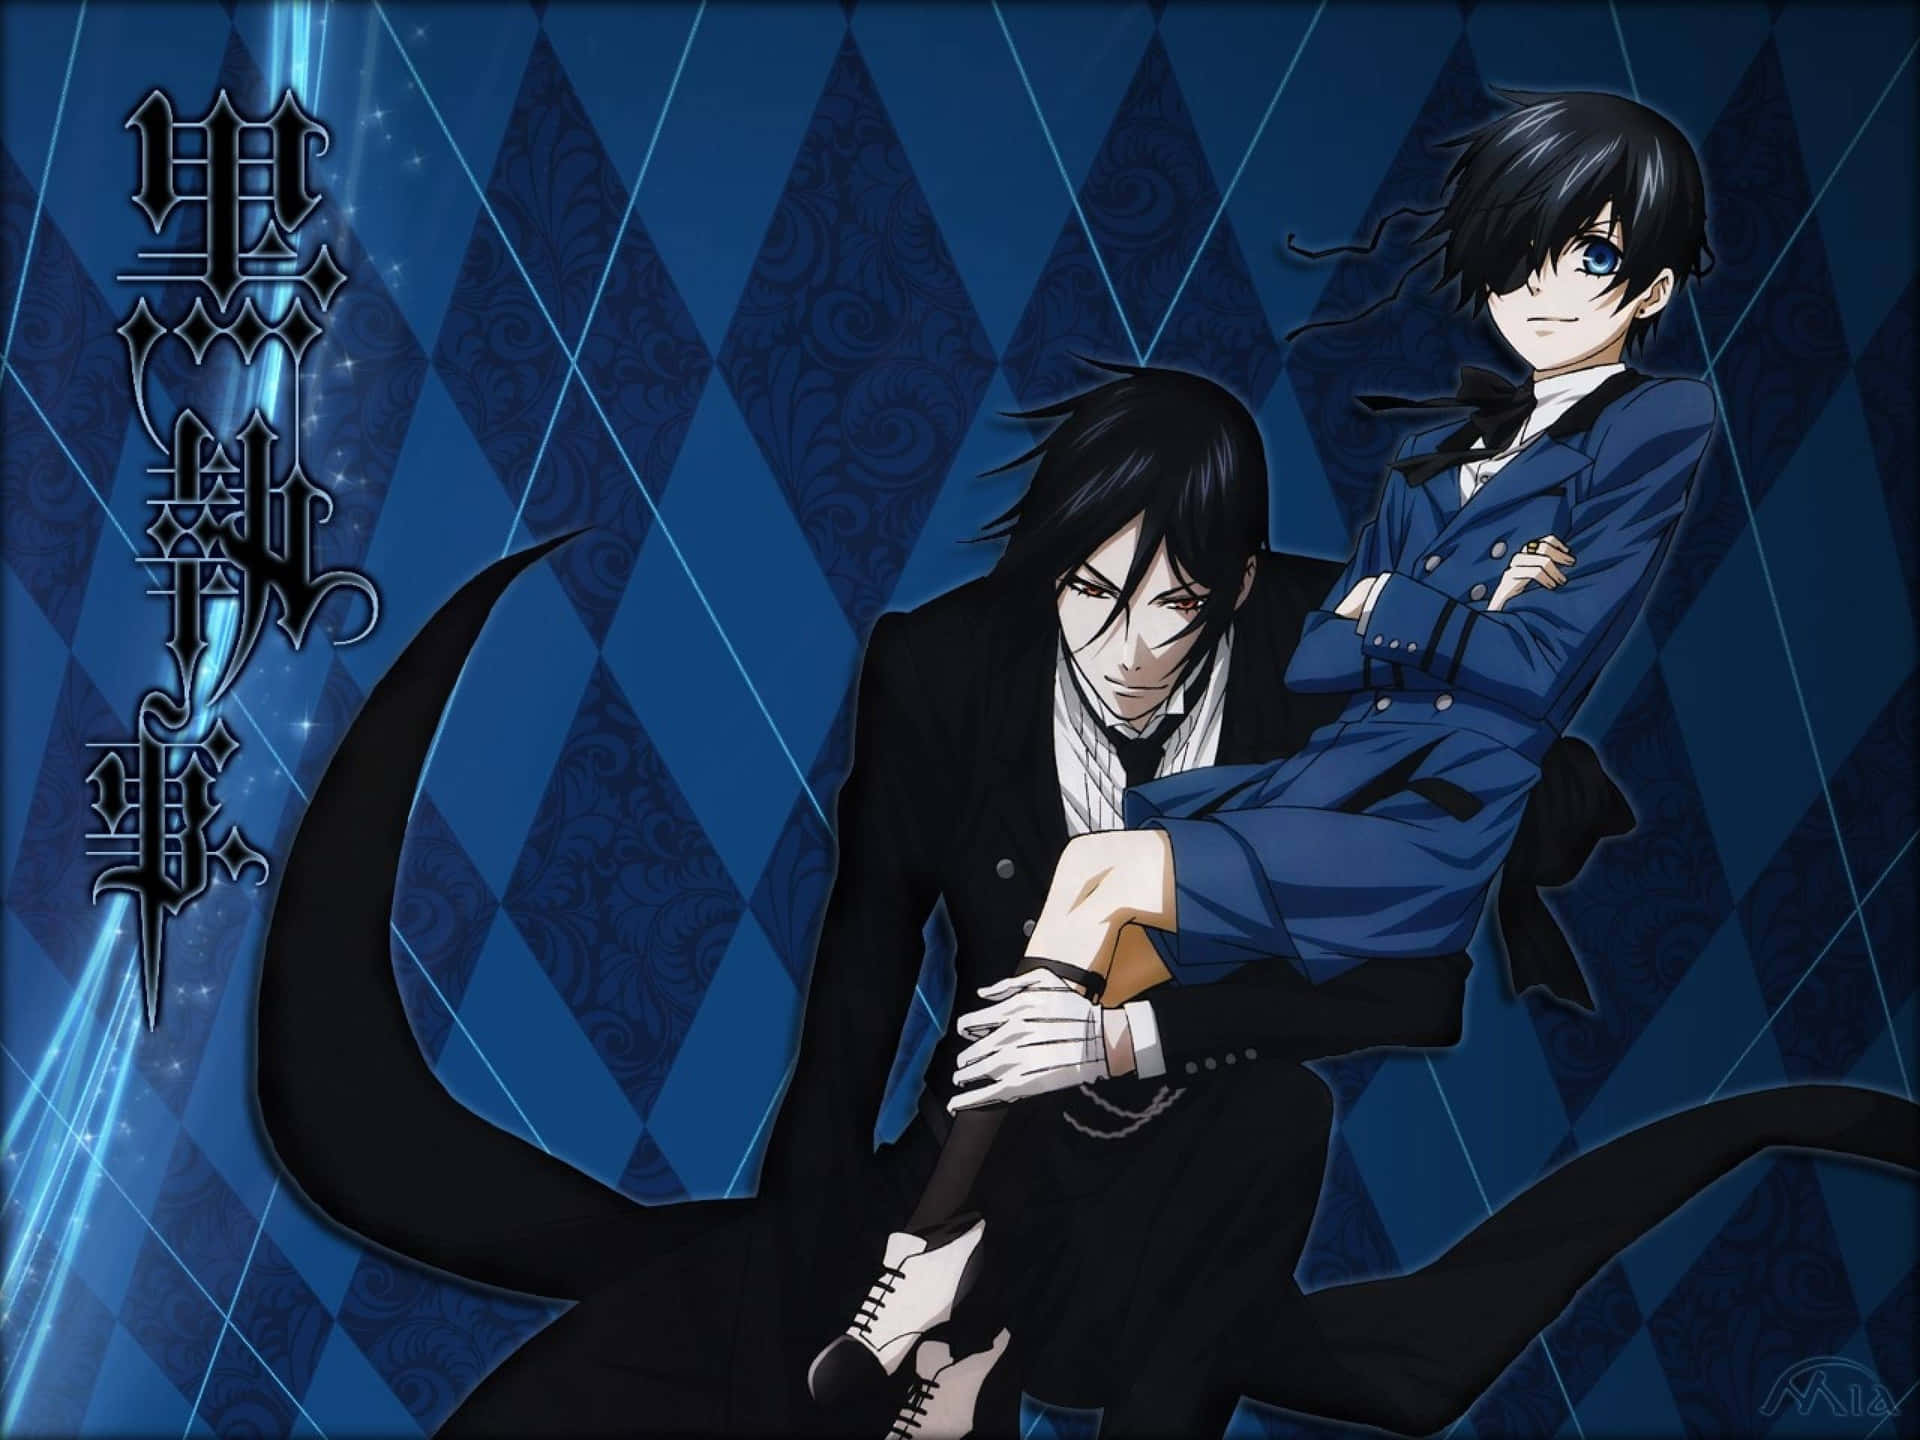 An unexpected ally appears: Keep your eyes peeled for the powerful Sebastian Michaelis.